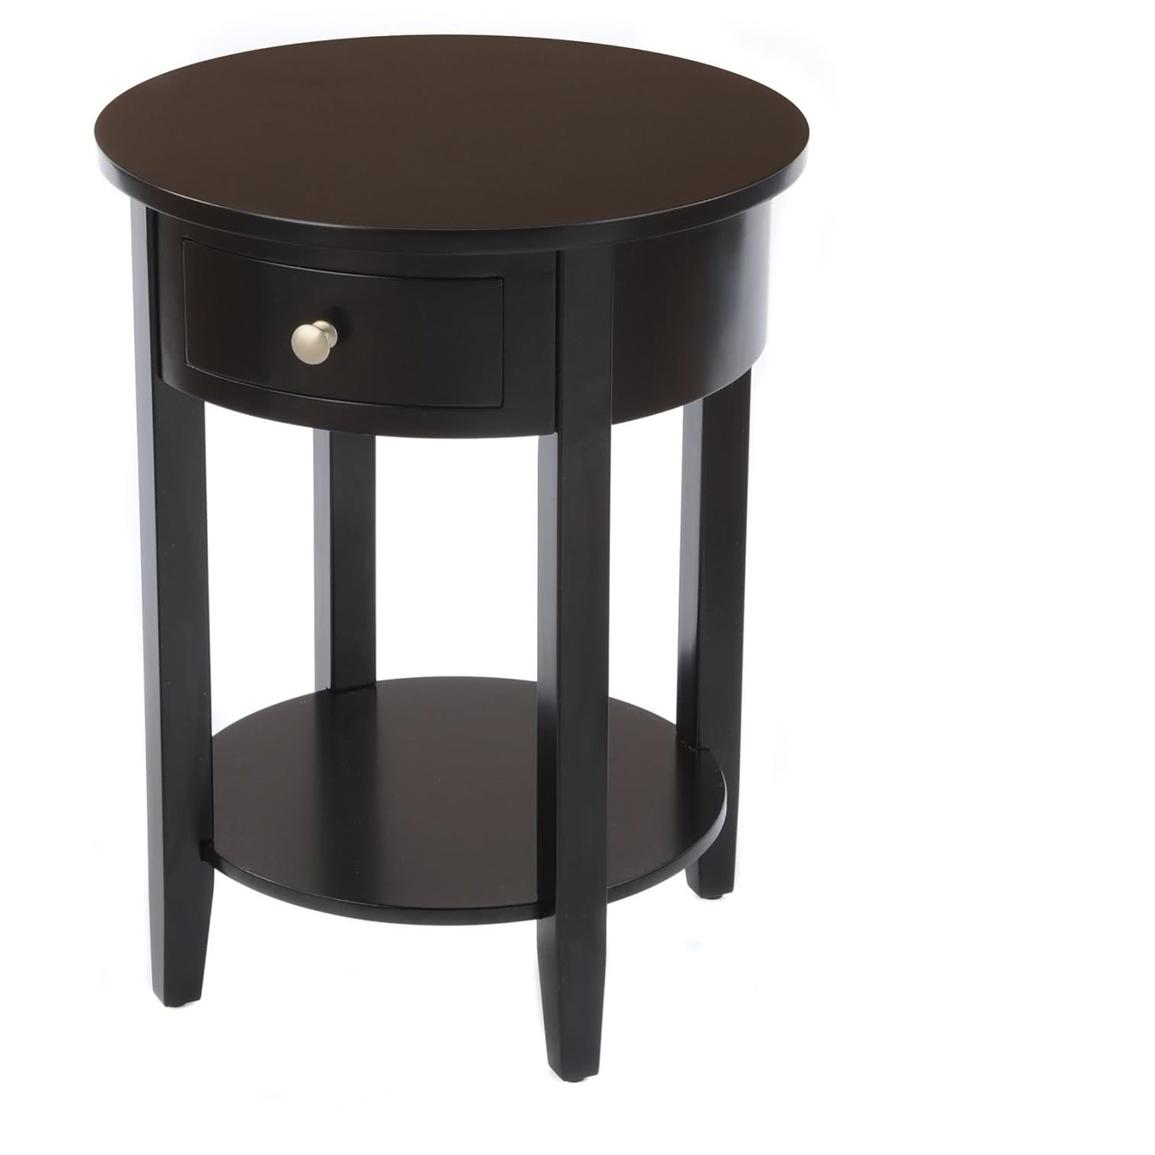 Round Side Table With Drawer 236468 Living Room At Sportsmans with Amazing round black coffee table with drawer you should have